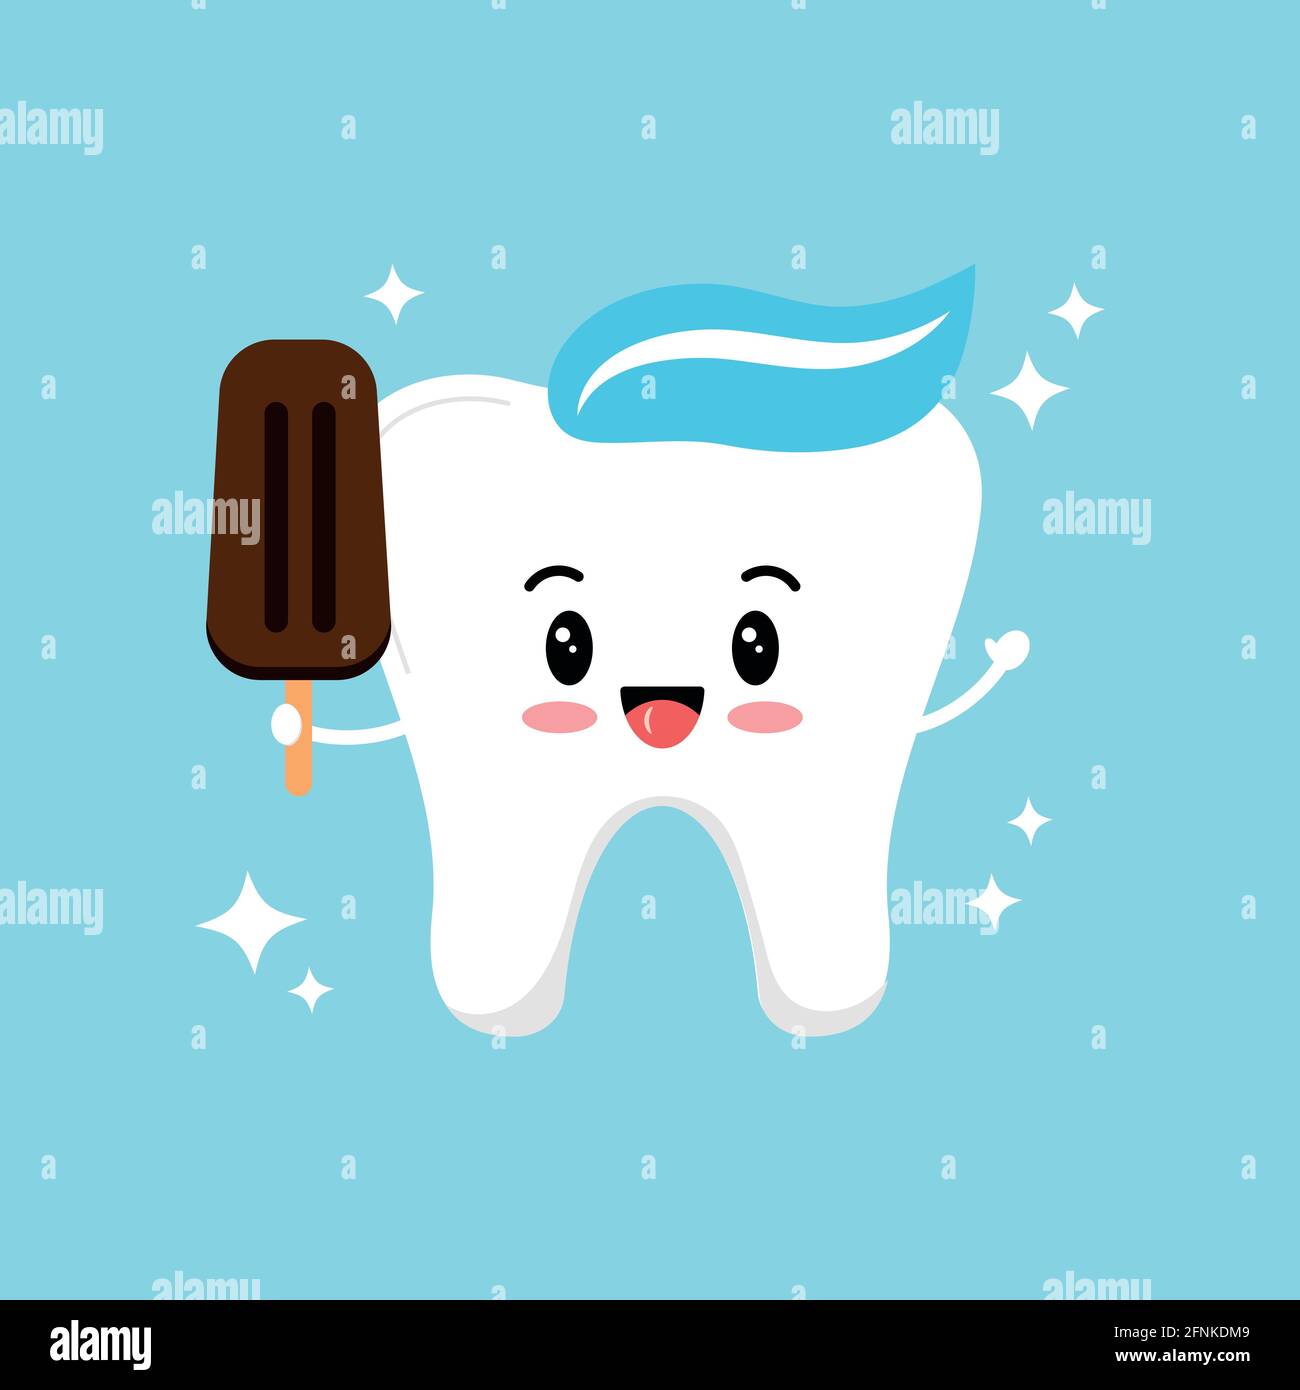 Cute tooth with ice cream clip art illustration Stock Vector